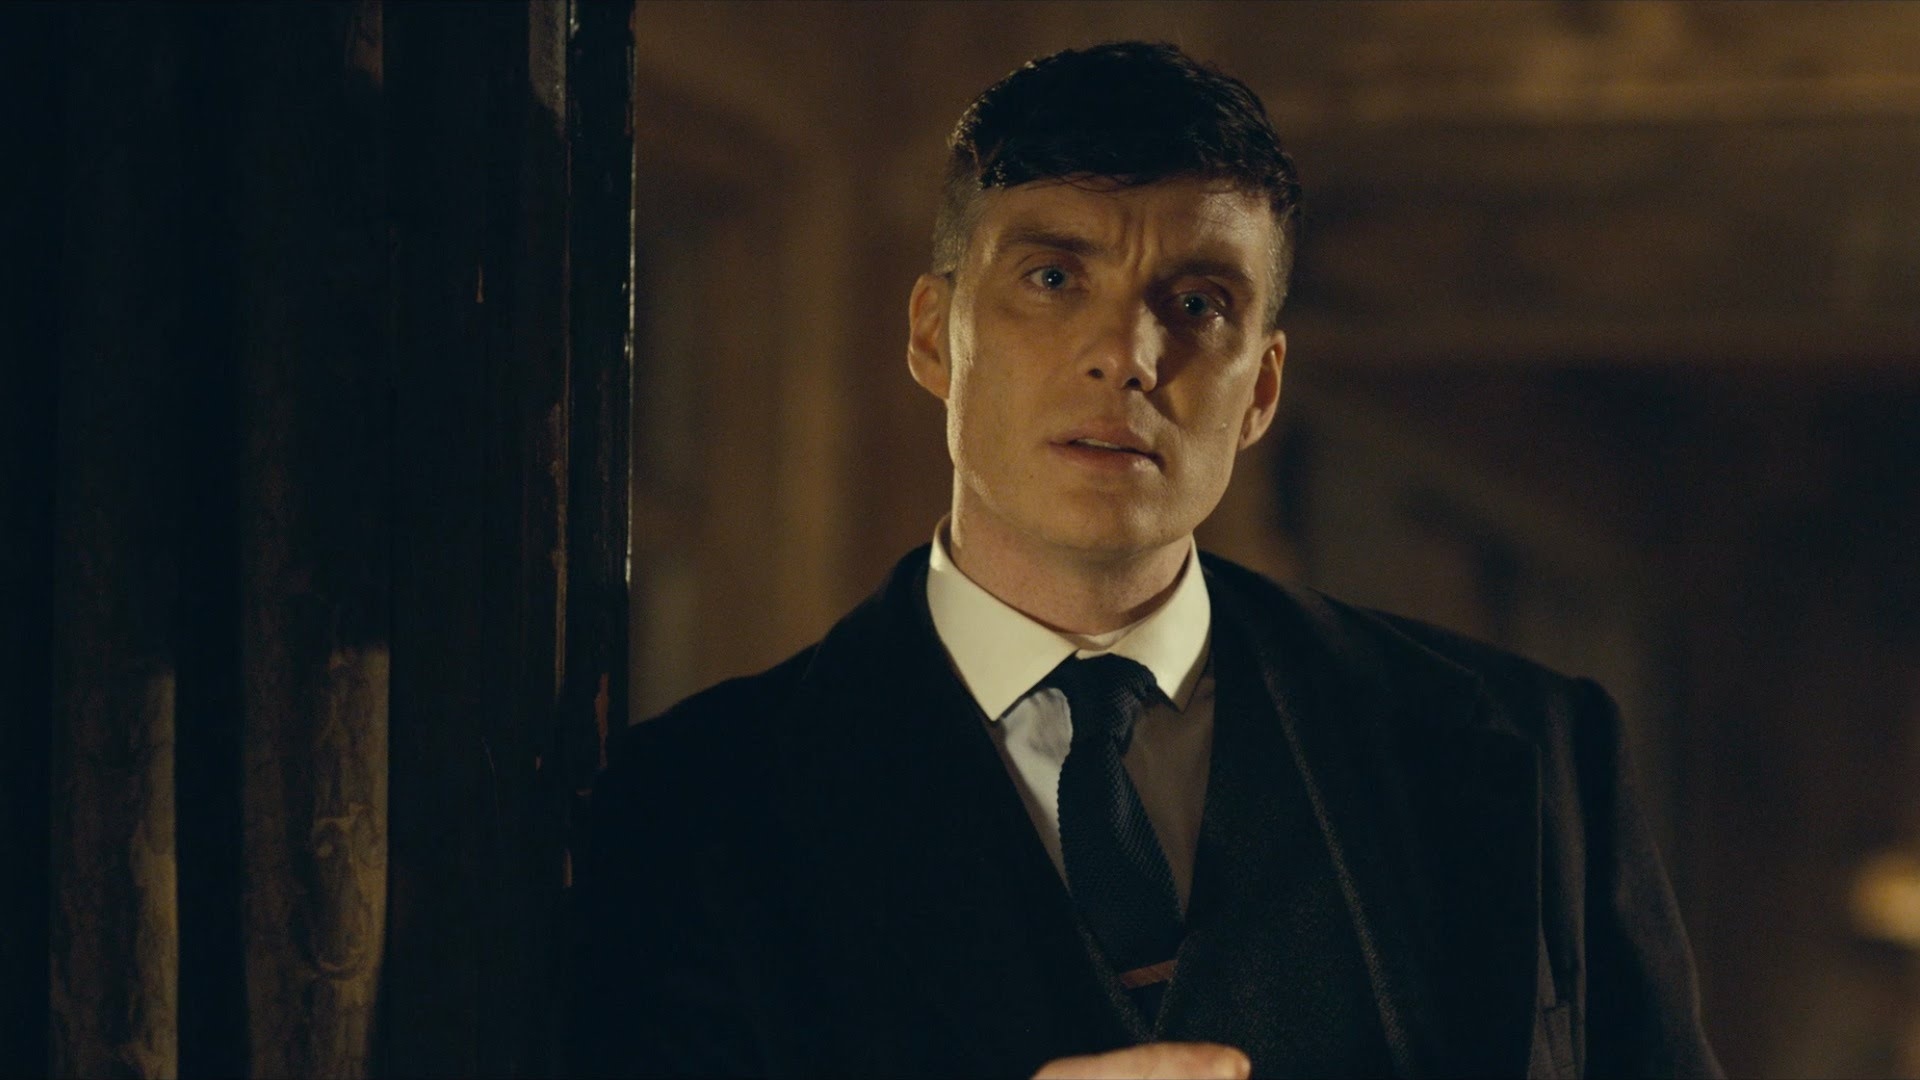 Peaky Blinders wallpapers, High-quality images, TV show aesthetics, Stunning visual appeal, 1920x1080 Full HD Desktop